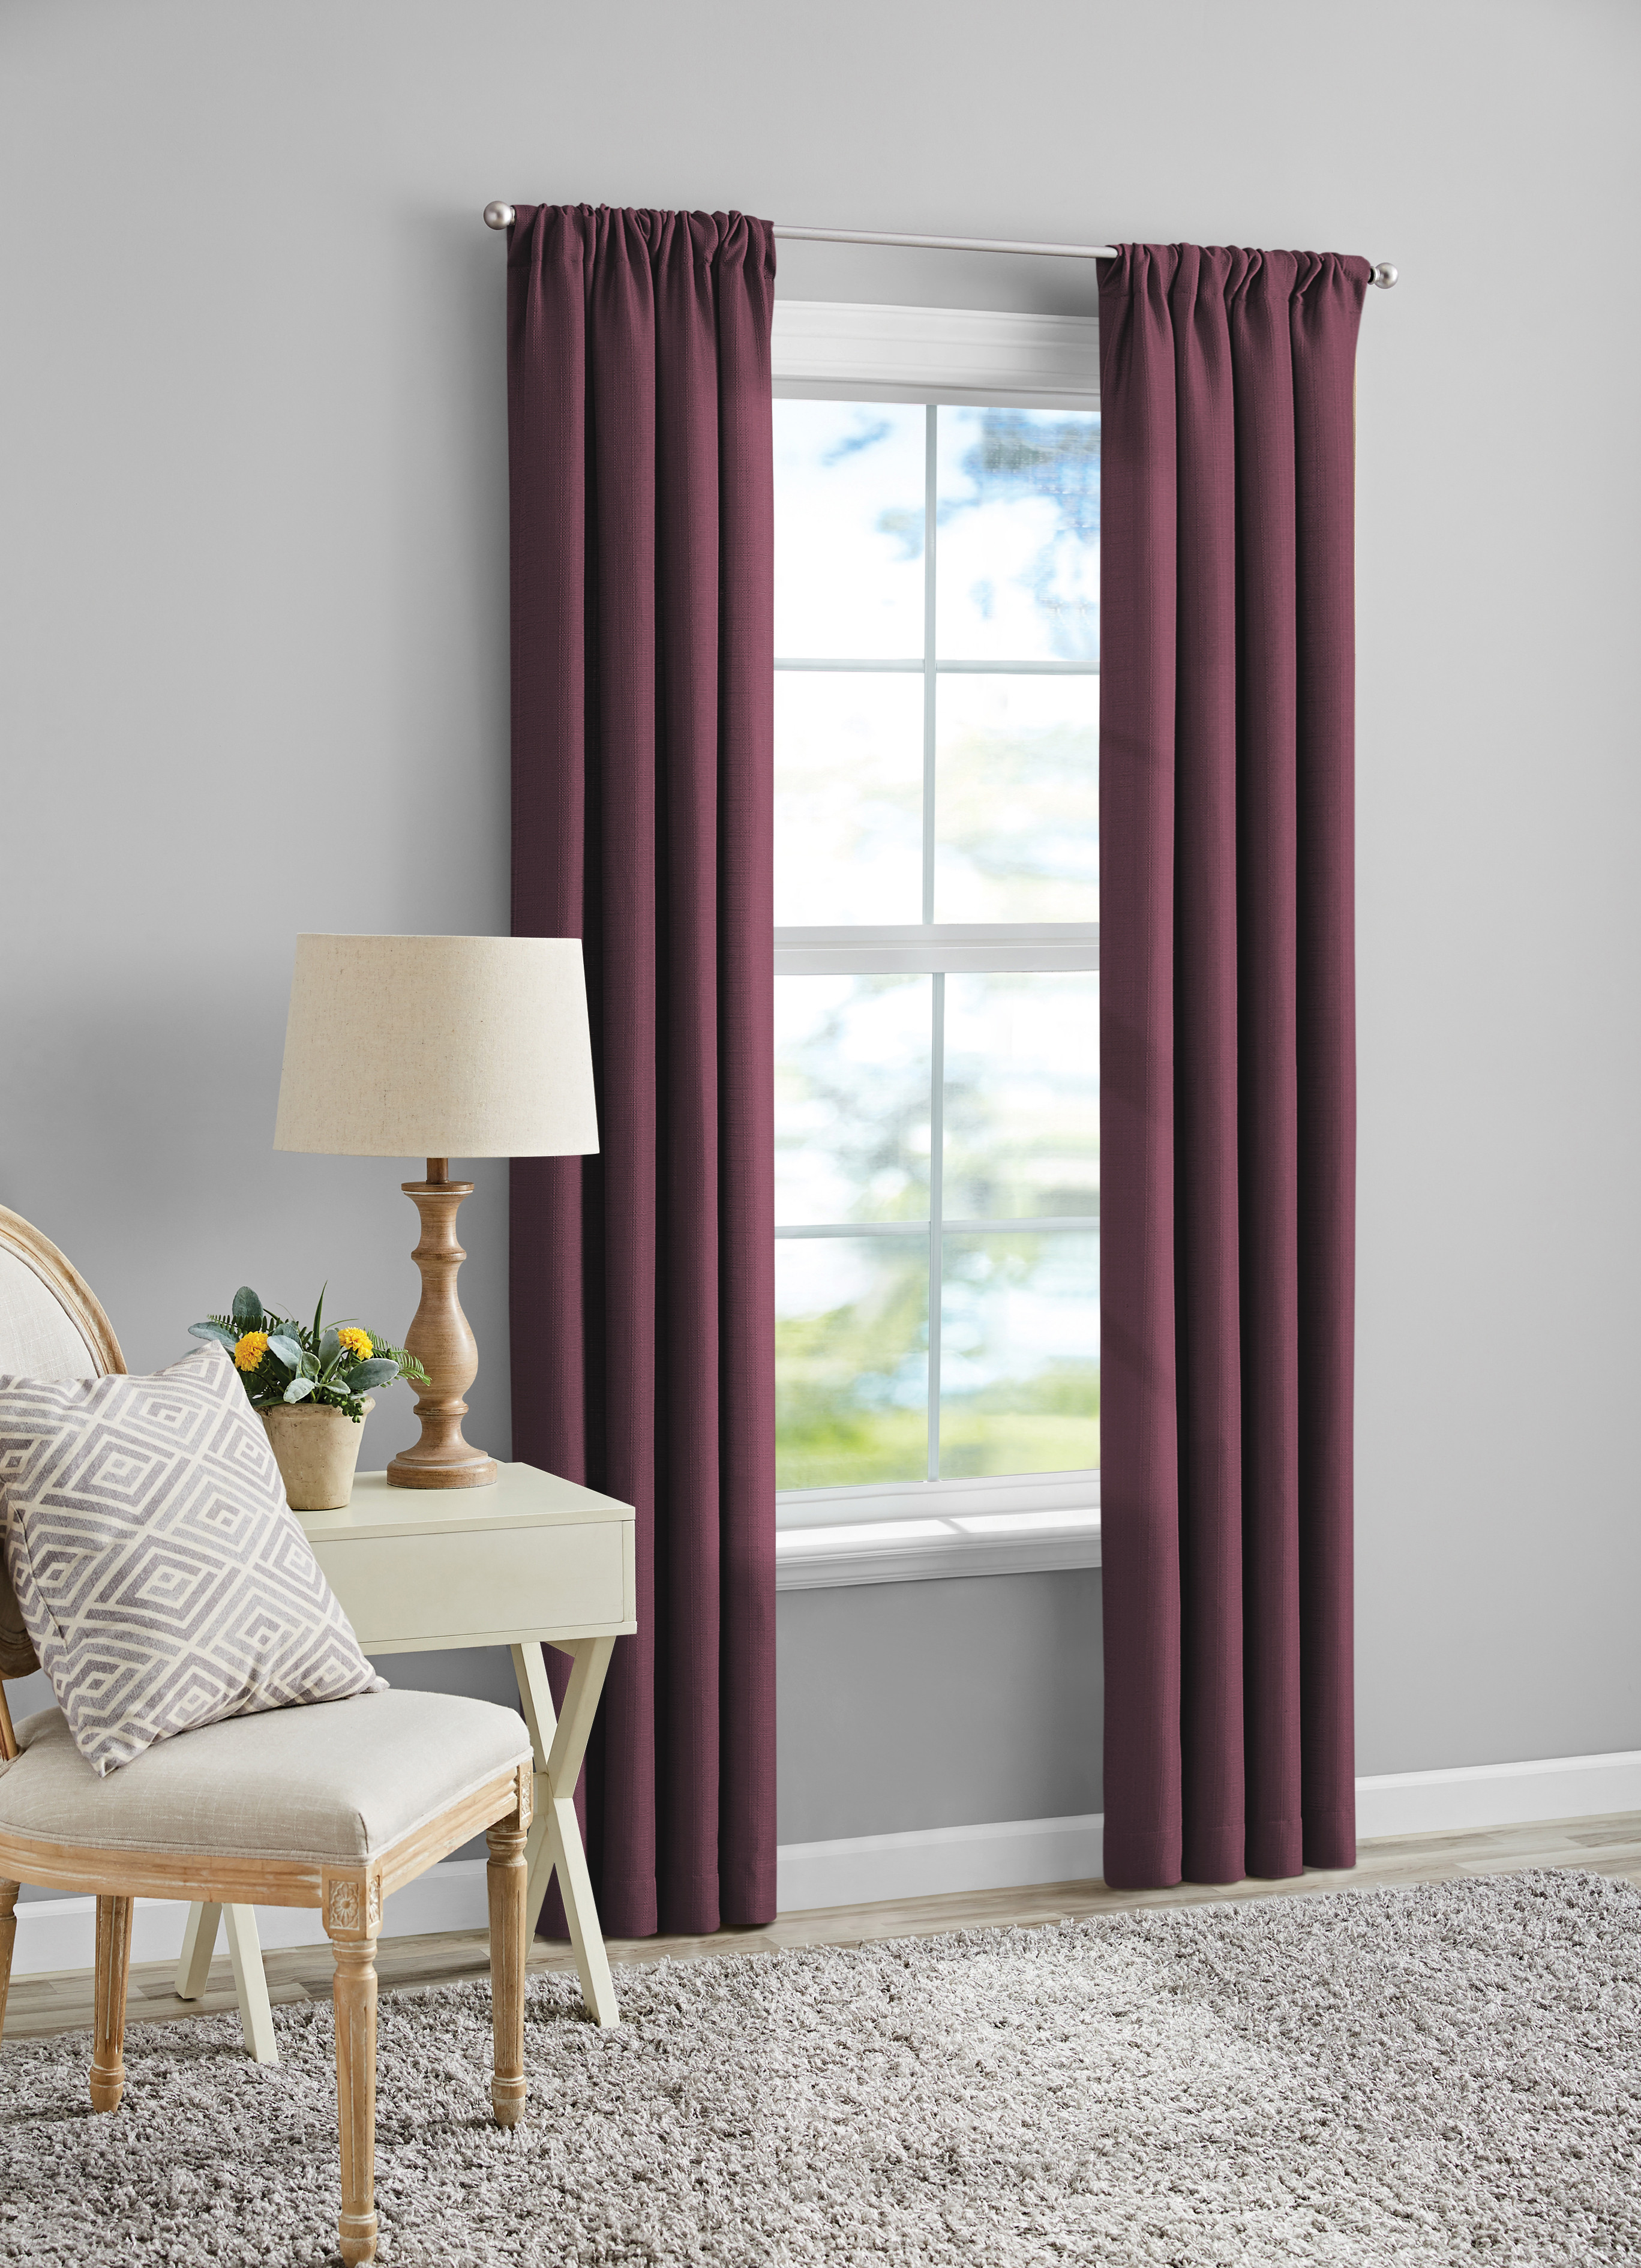 Mainstays Southport Burgundy Solid Color Light Filtering Rod Pocket Curtain Panel Pair, 40" x 84" - image 3 of 10